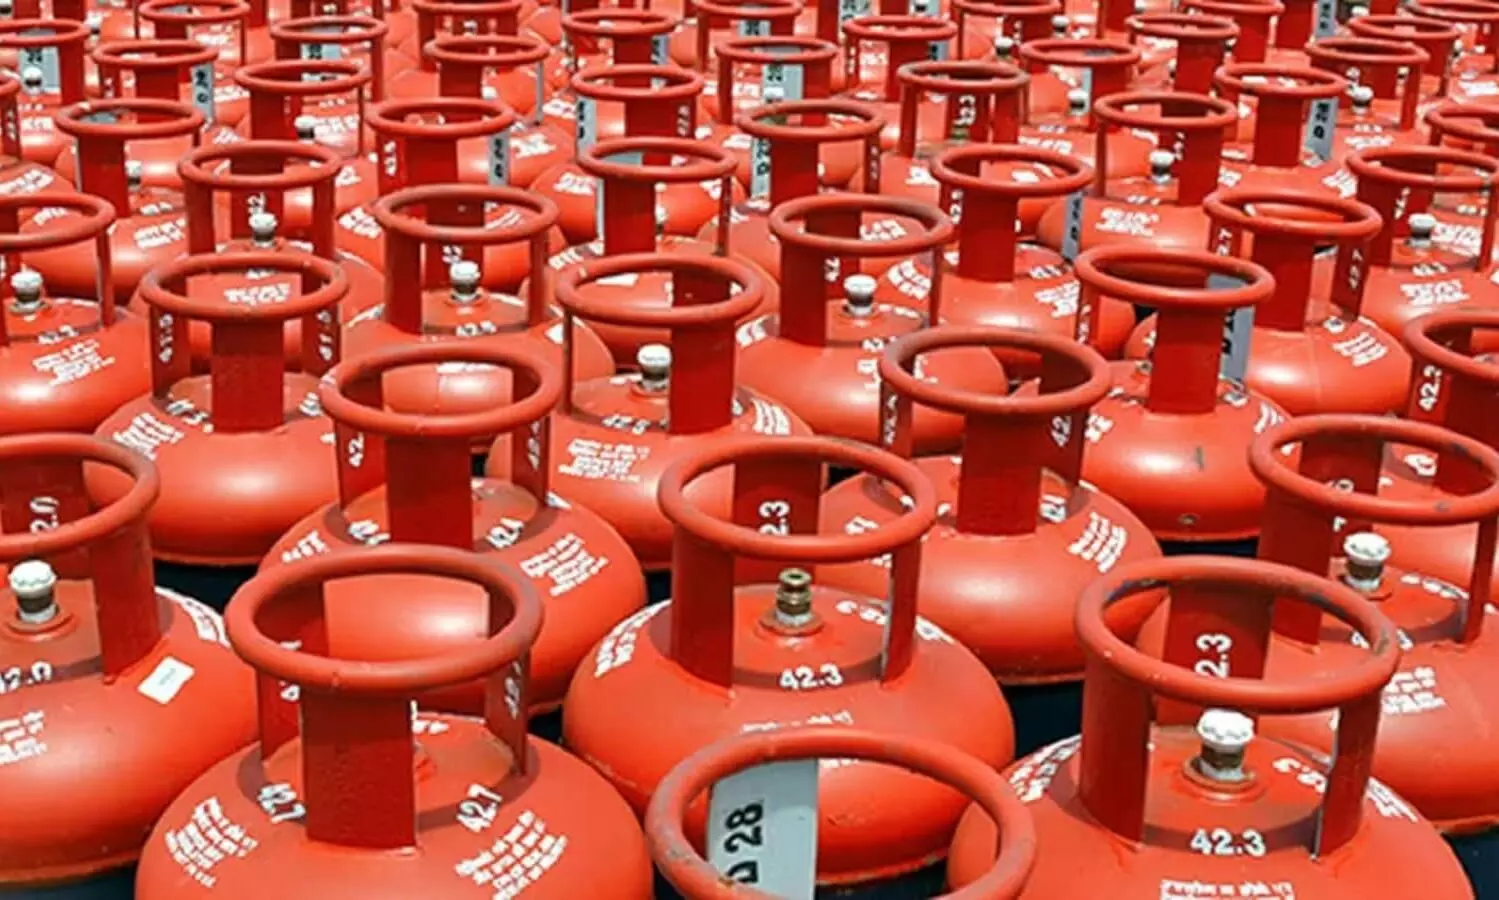 Commercial LPG cylinder price hiked by Rs 209